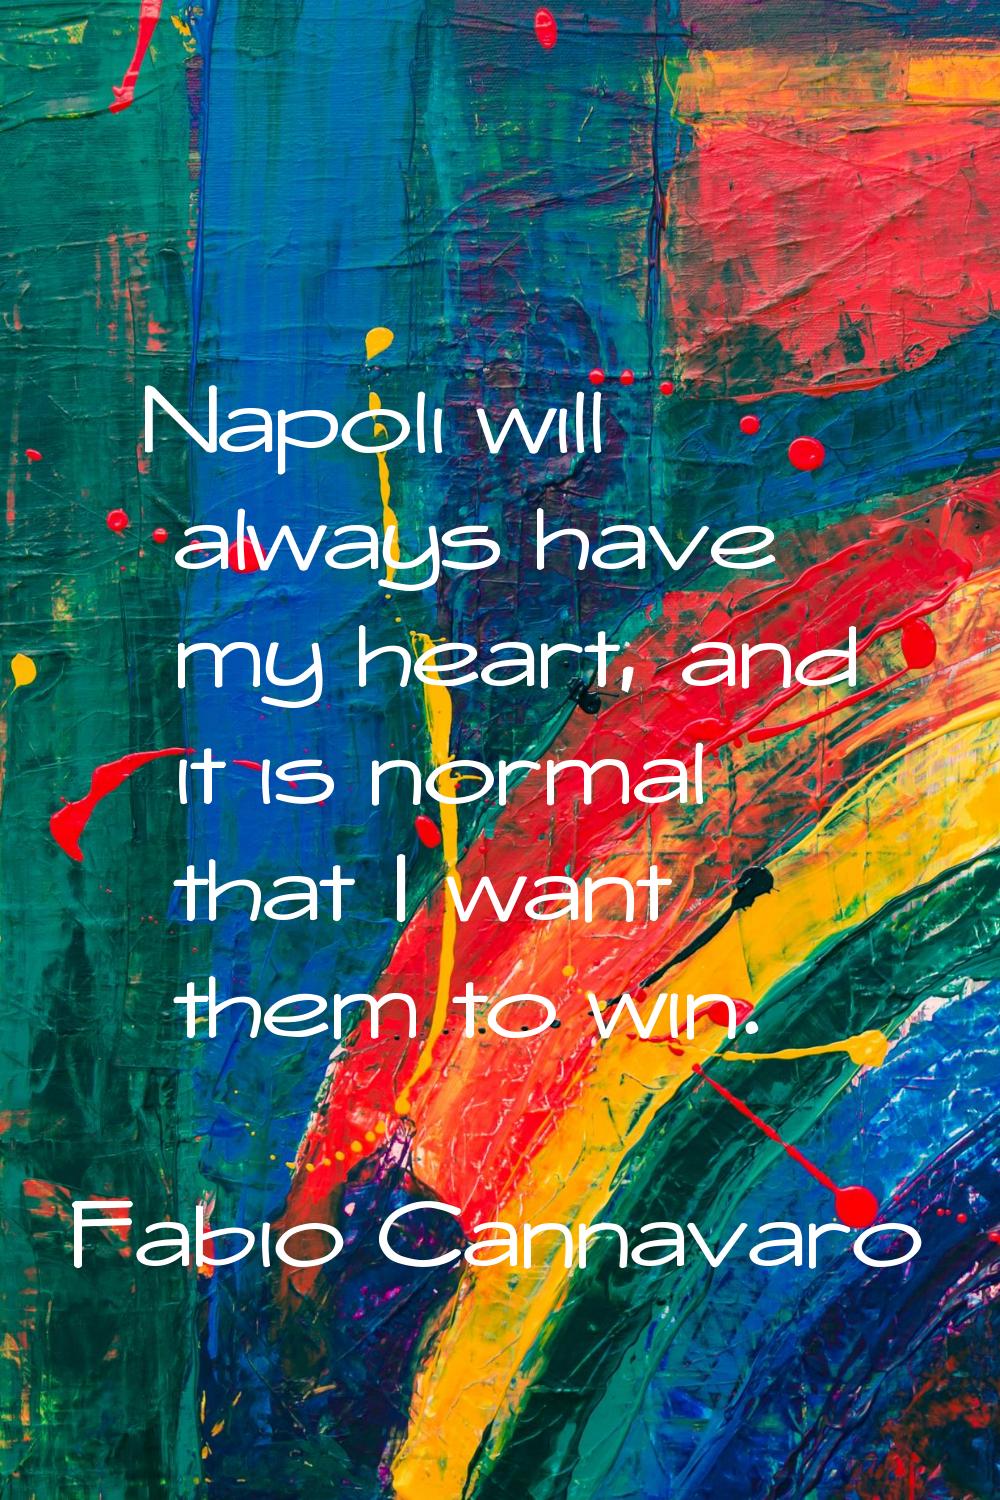 Napoli will always have my heart, and it is normal that I want them to win.